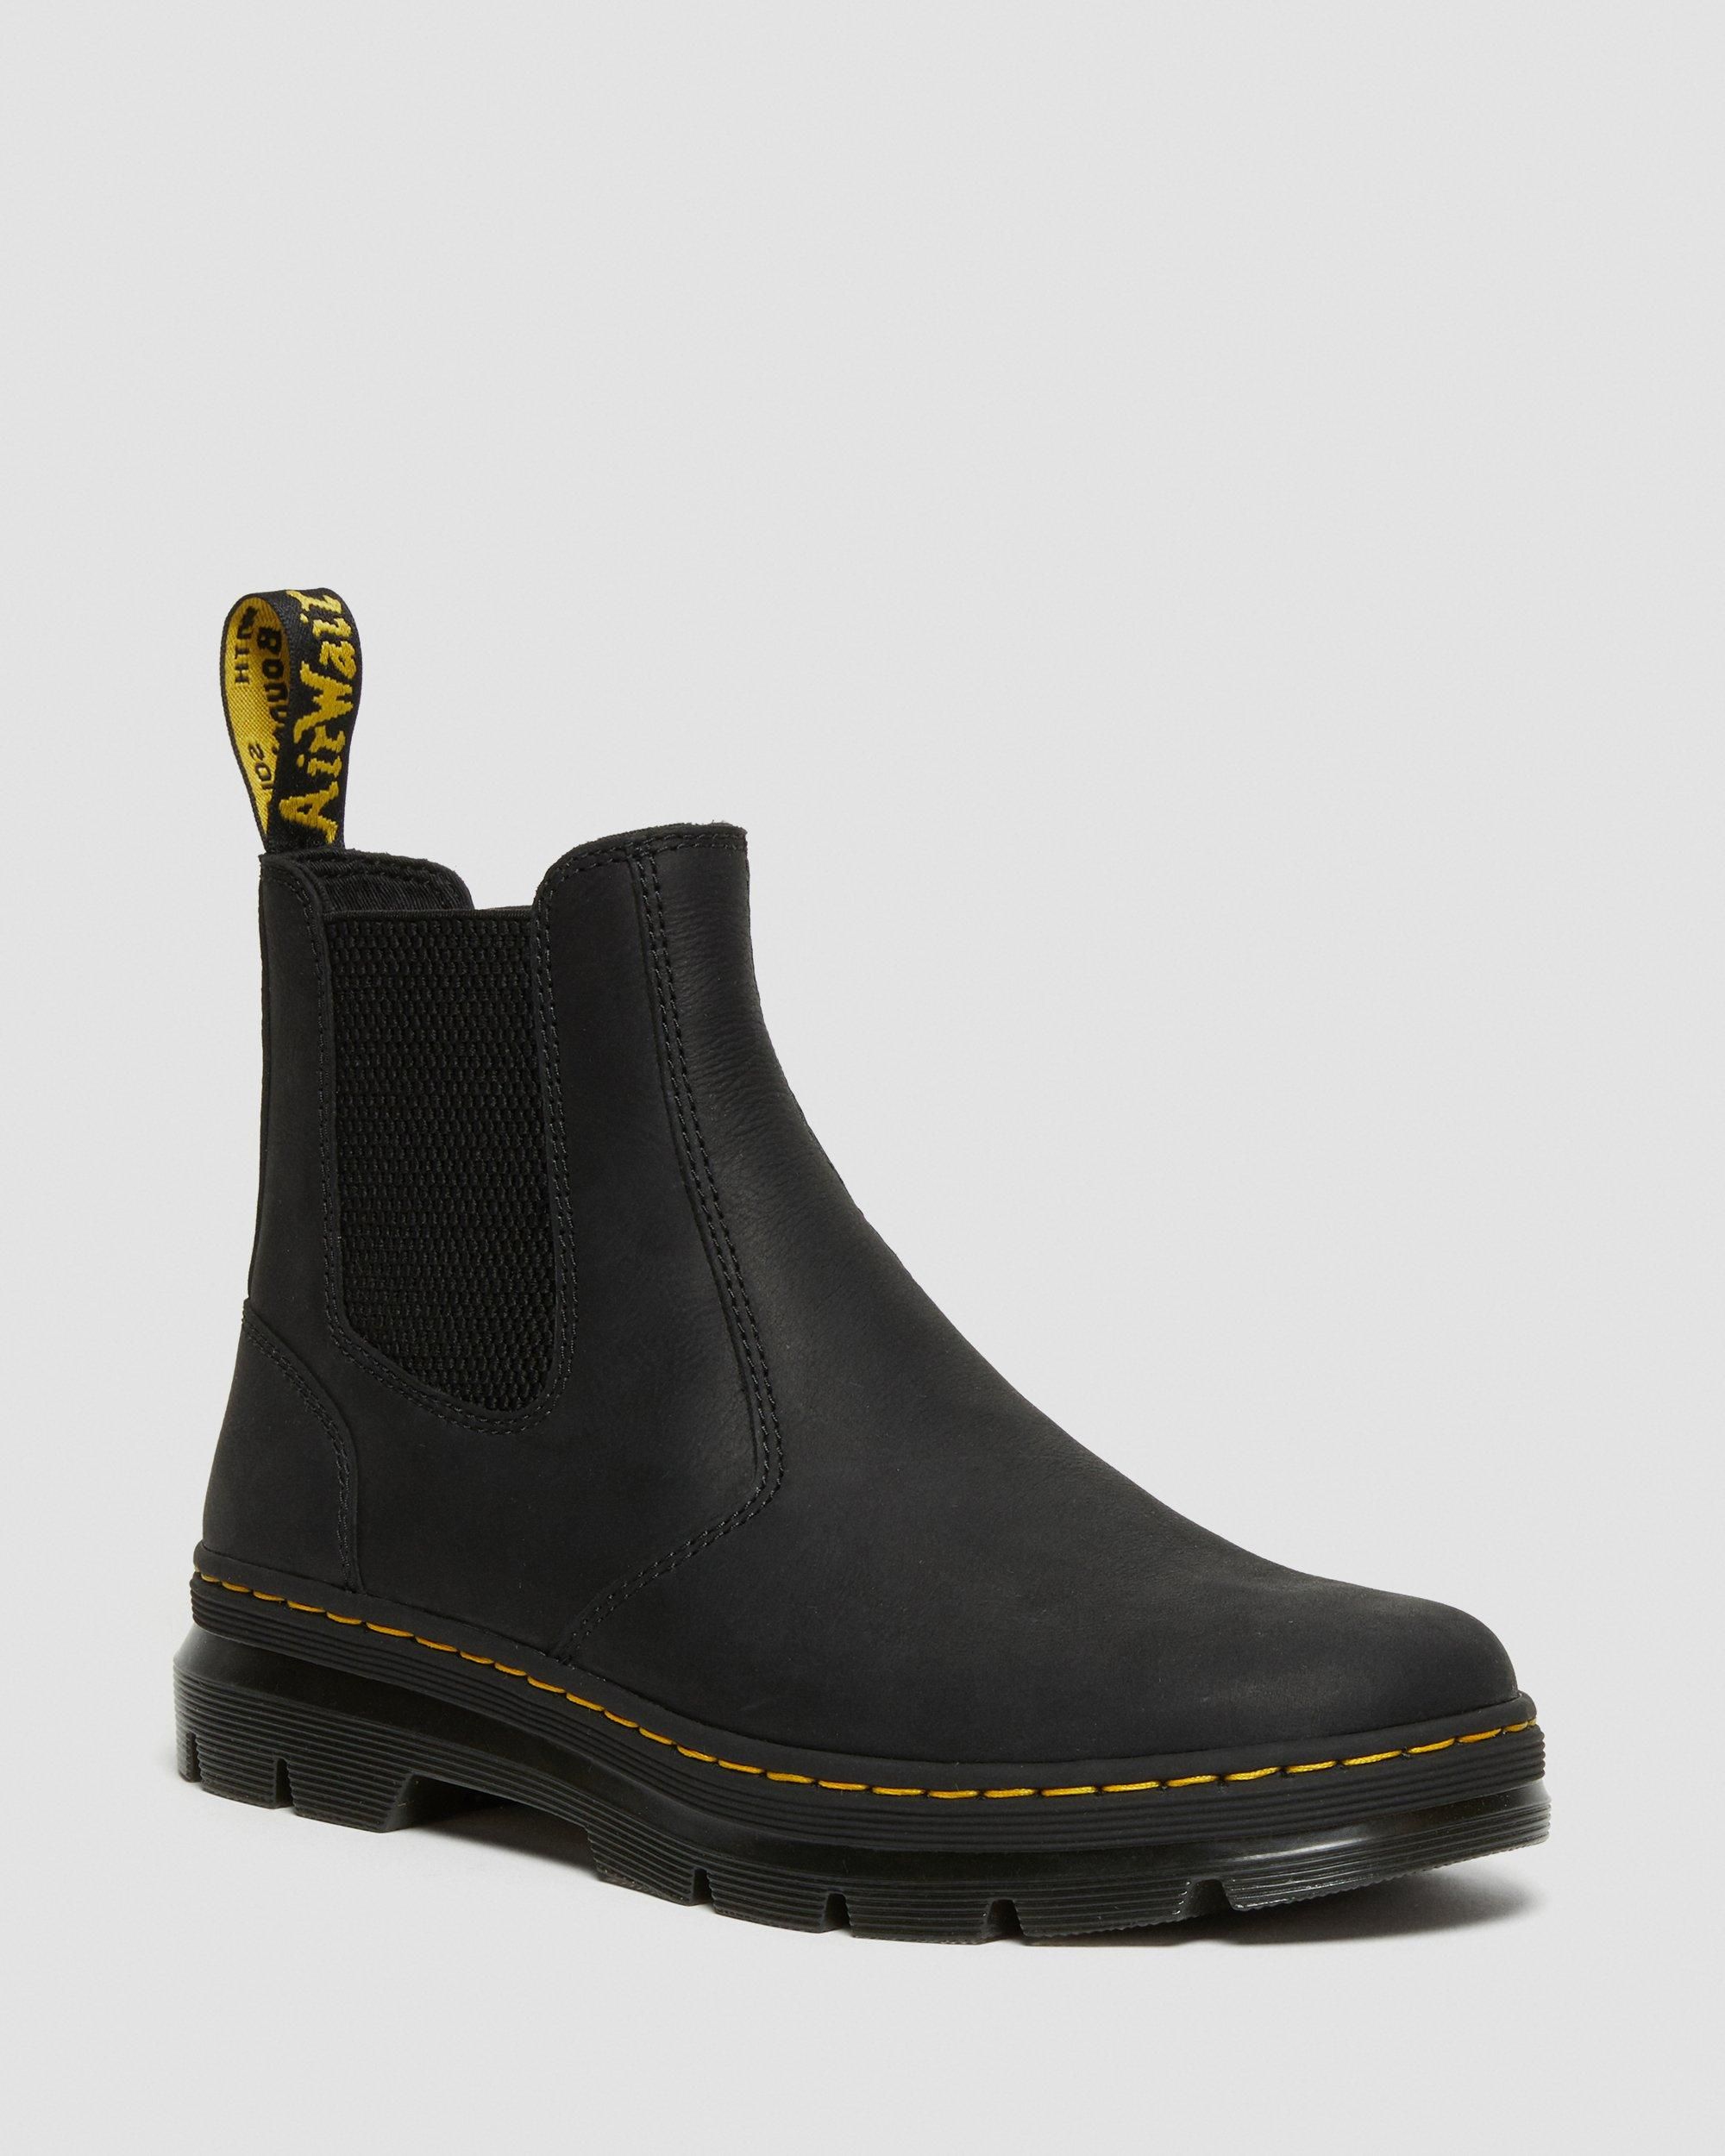 Embury Leather Casual Chelsea Boots | Dr. Martens